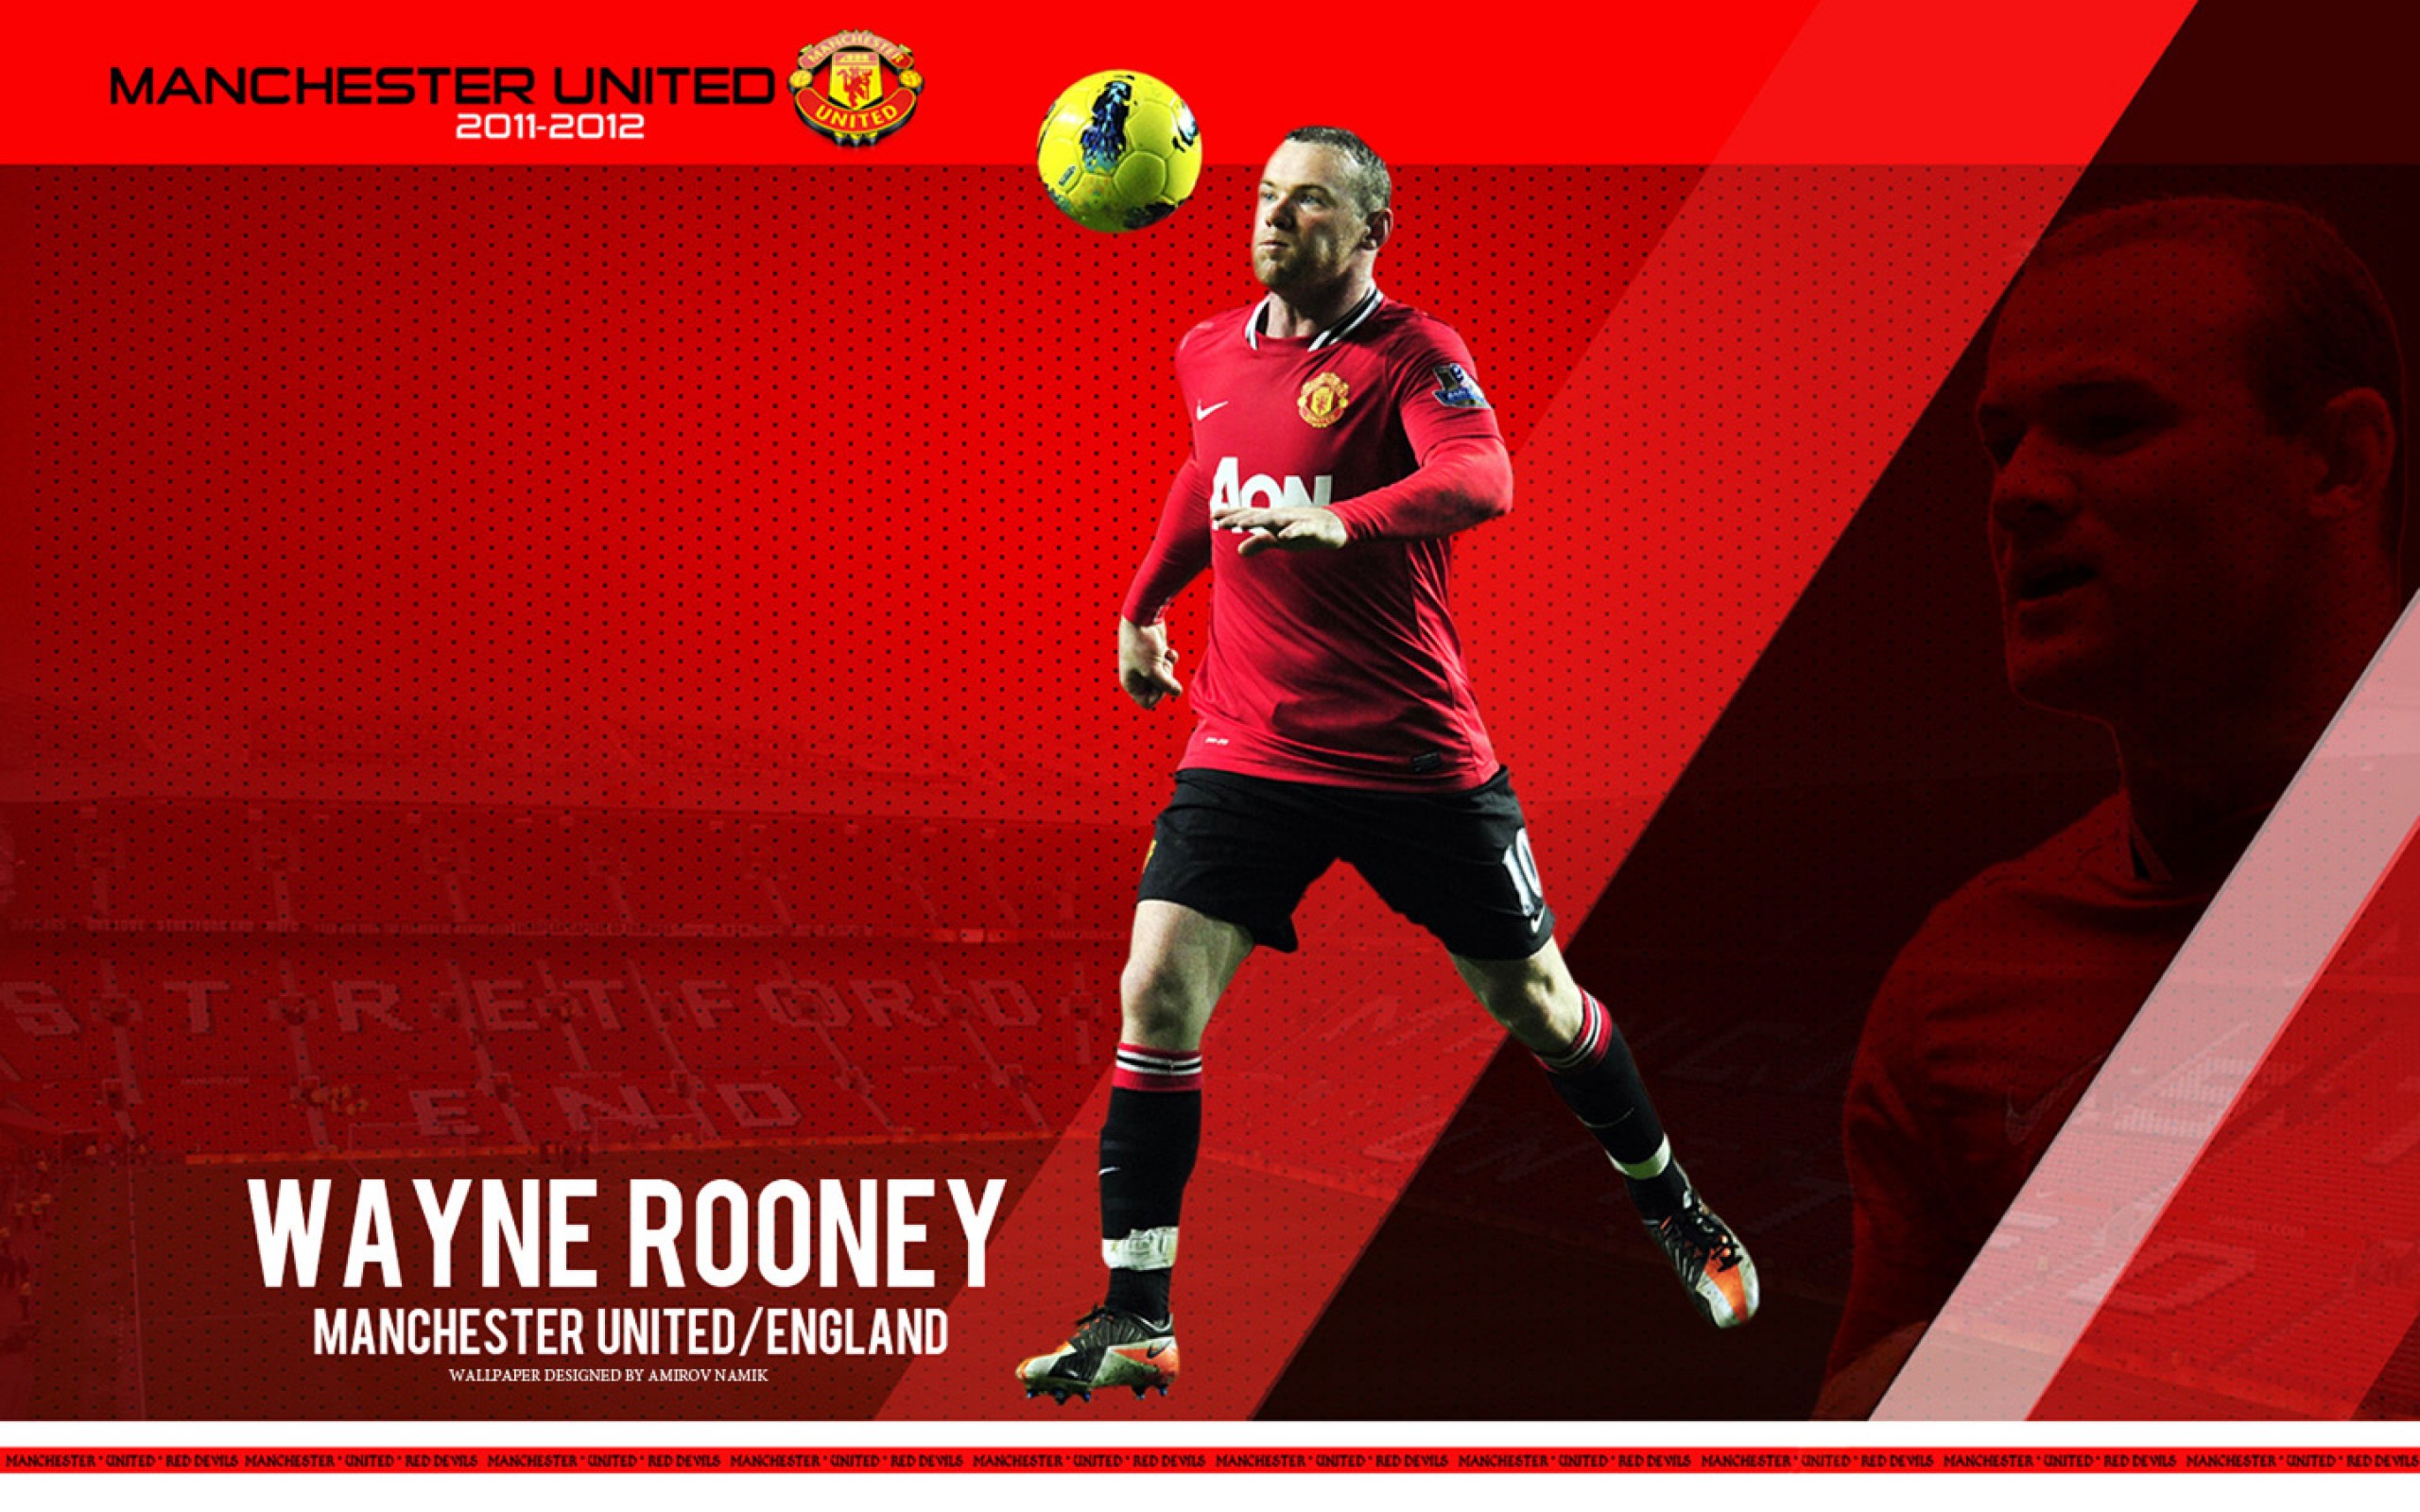 Wayne Rooney - photo wallpapers, pictures with Wayne Rooney